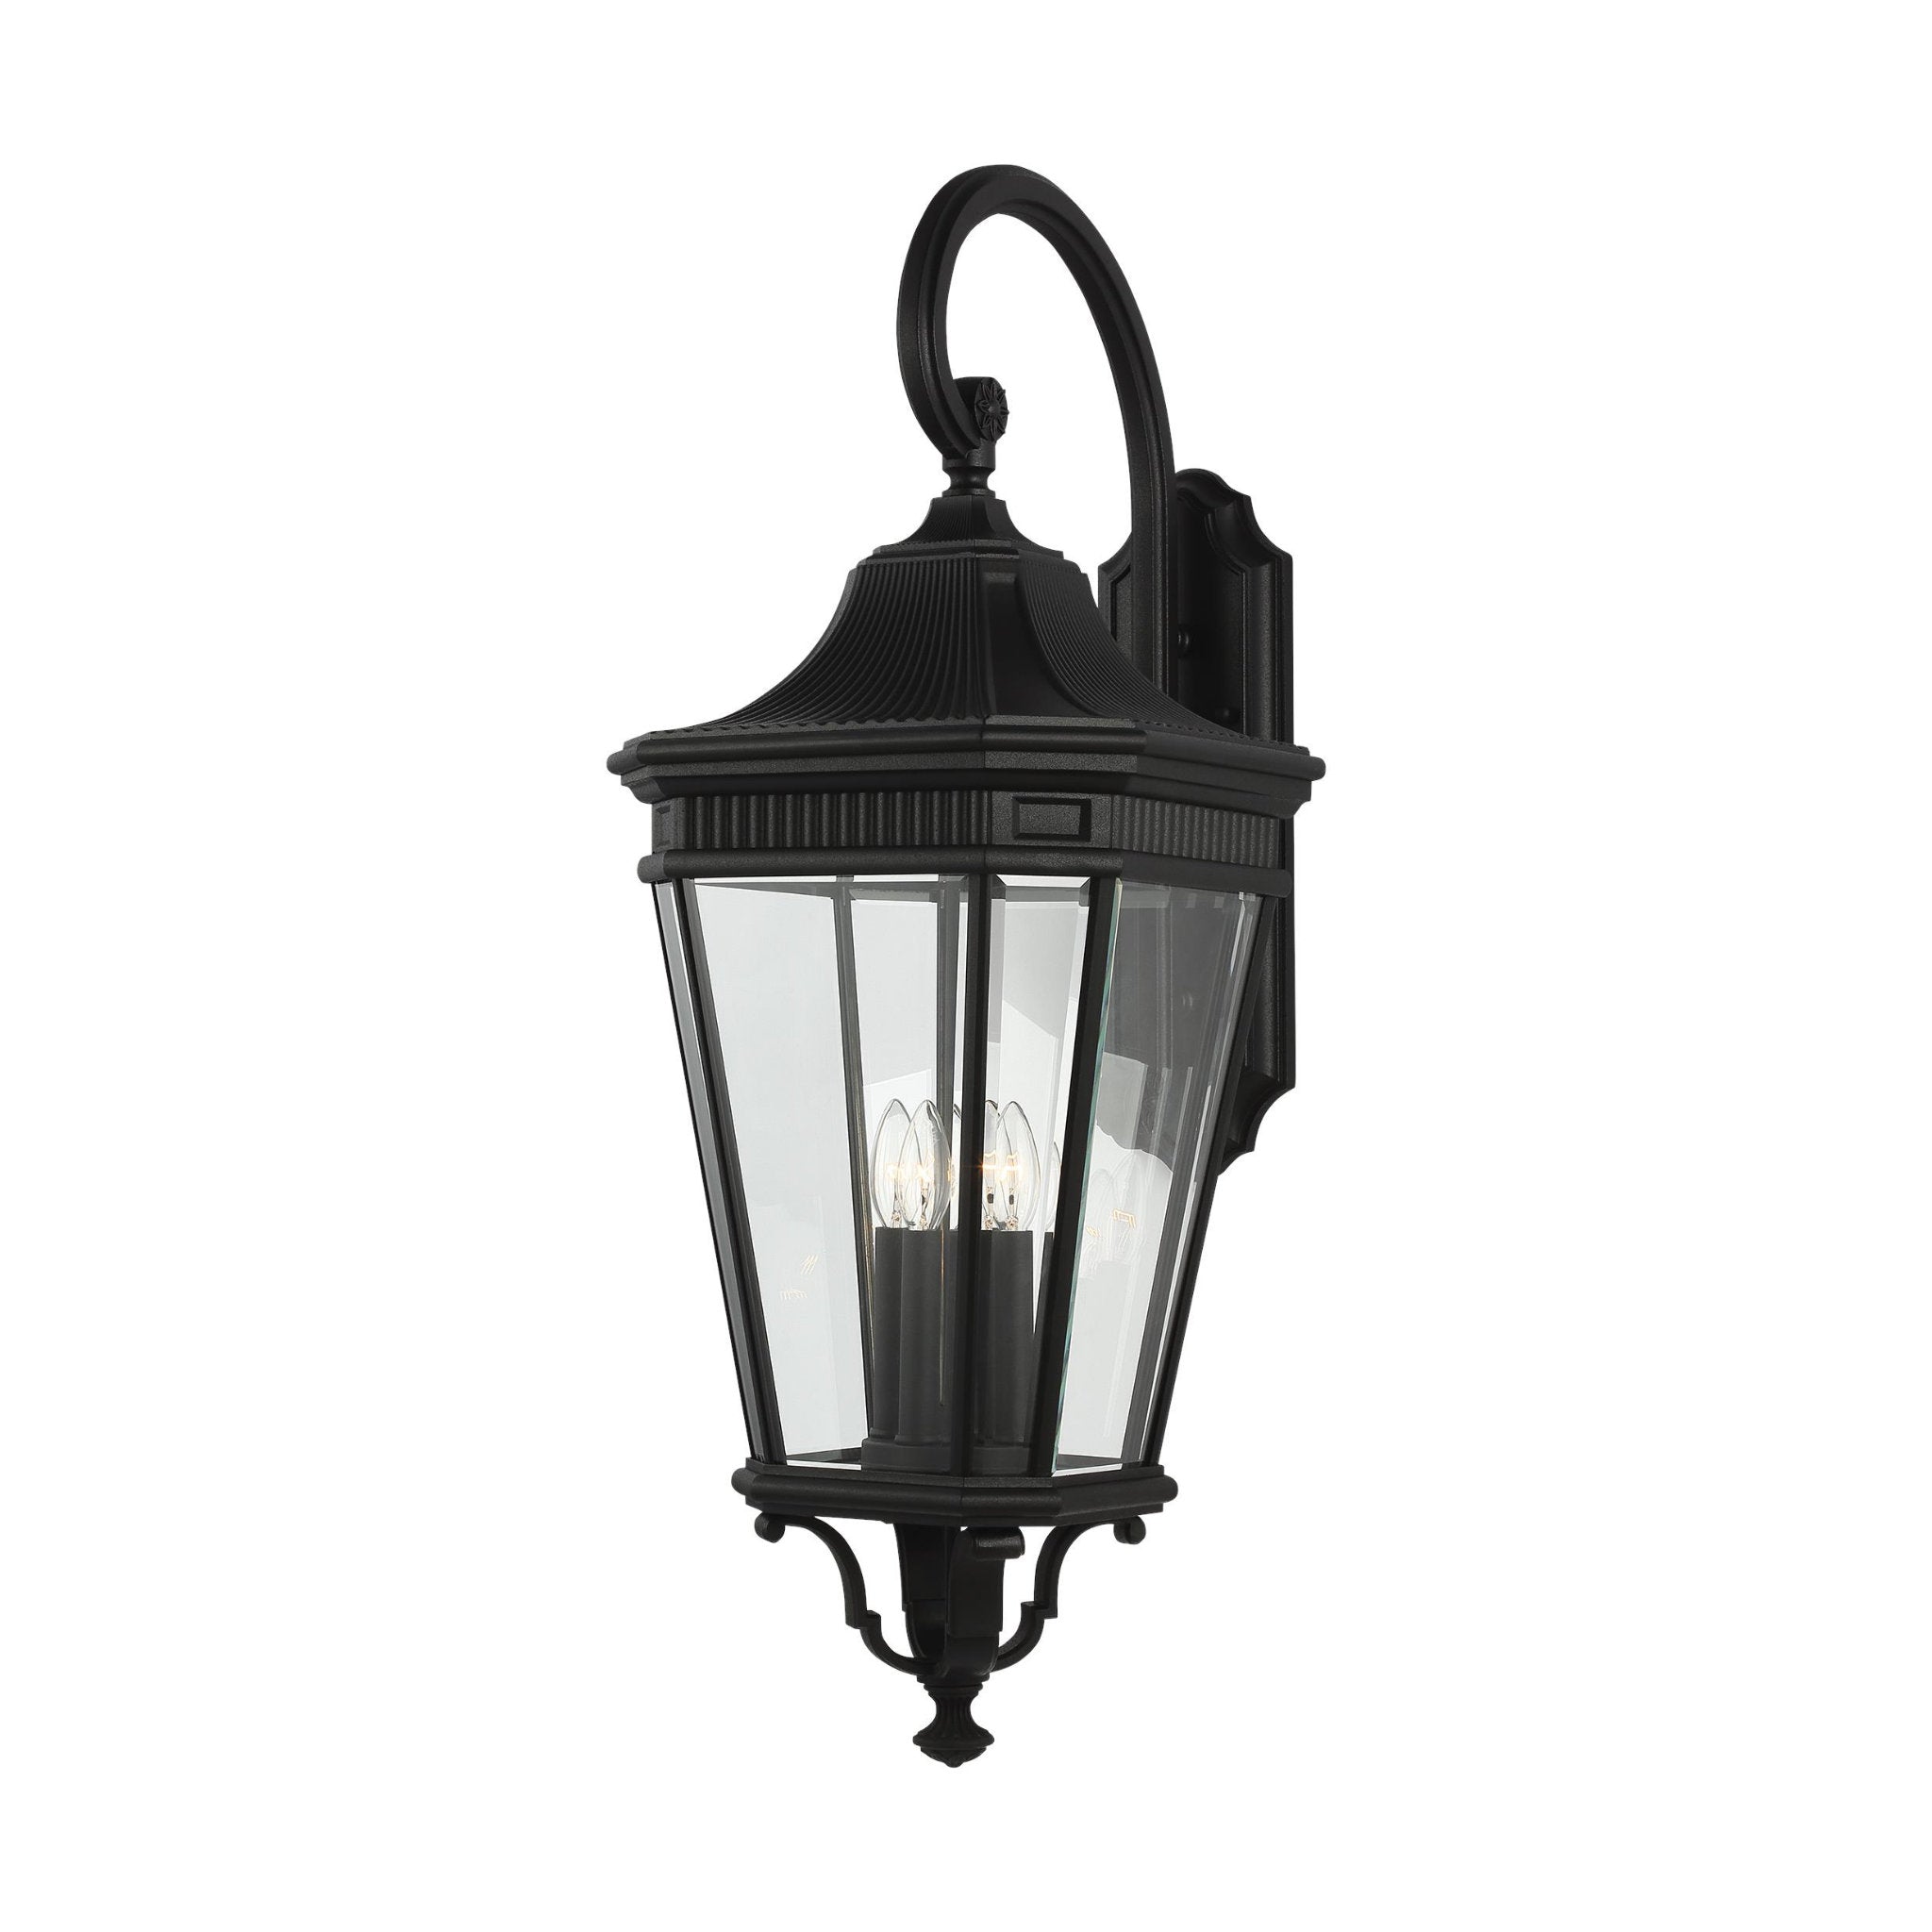 Cotswold Lane Extra Large Lantern Traditional Outdoor Fixture 13.625" Width 36.25" Height Aluminum Irregular Clear Beveled Shade in Black